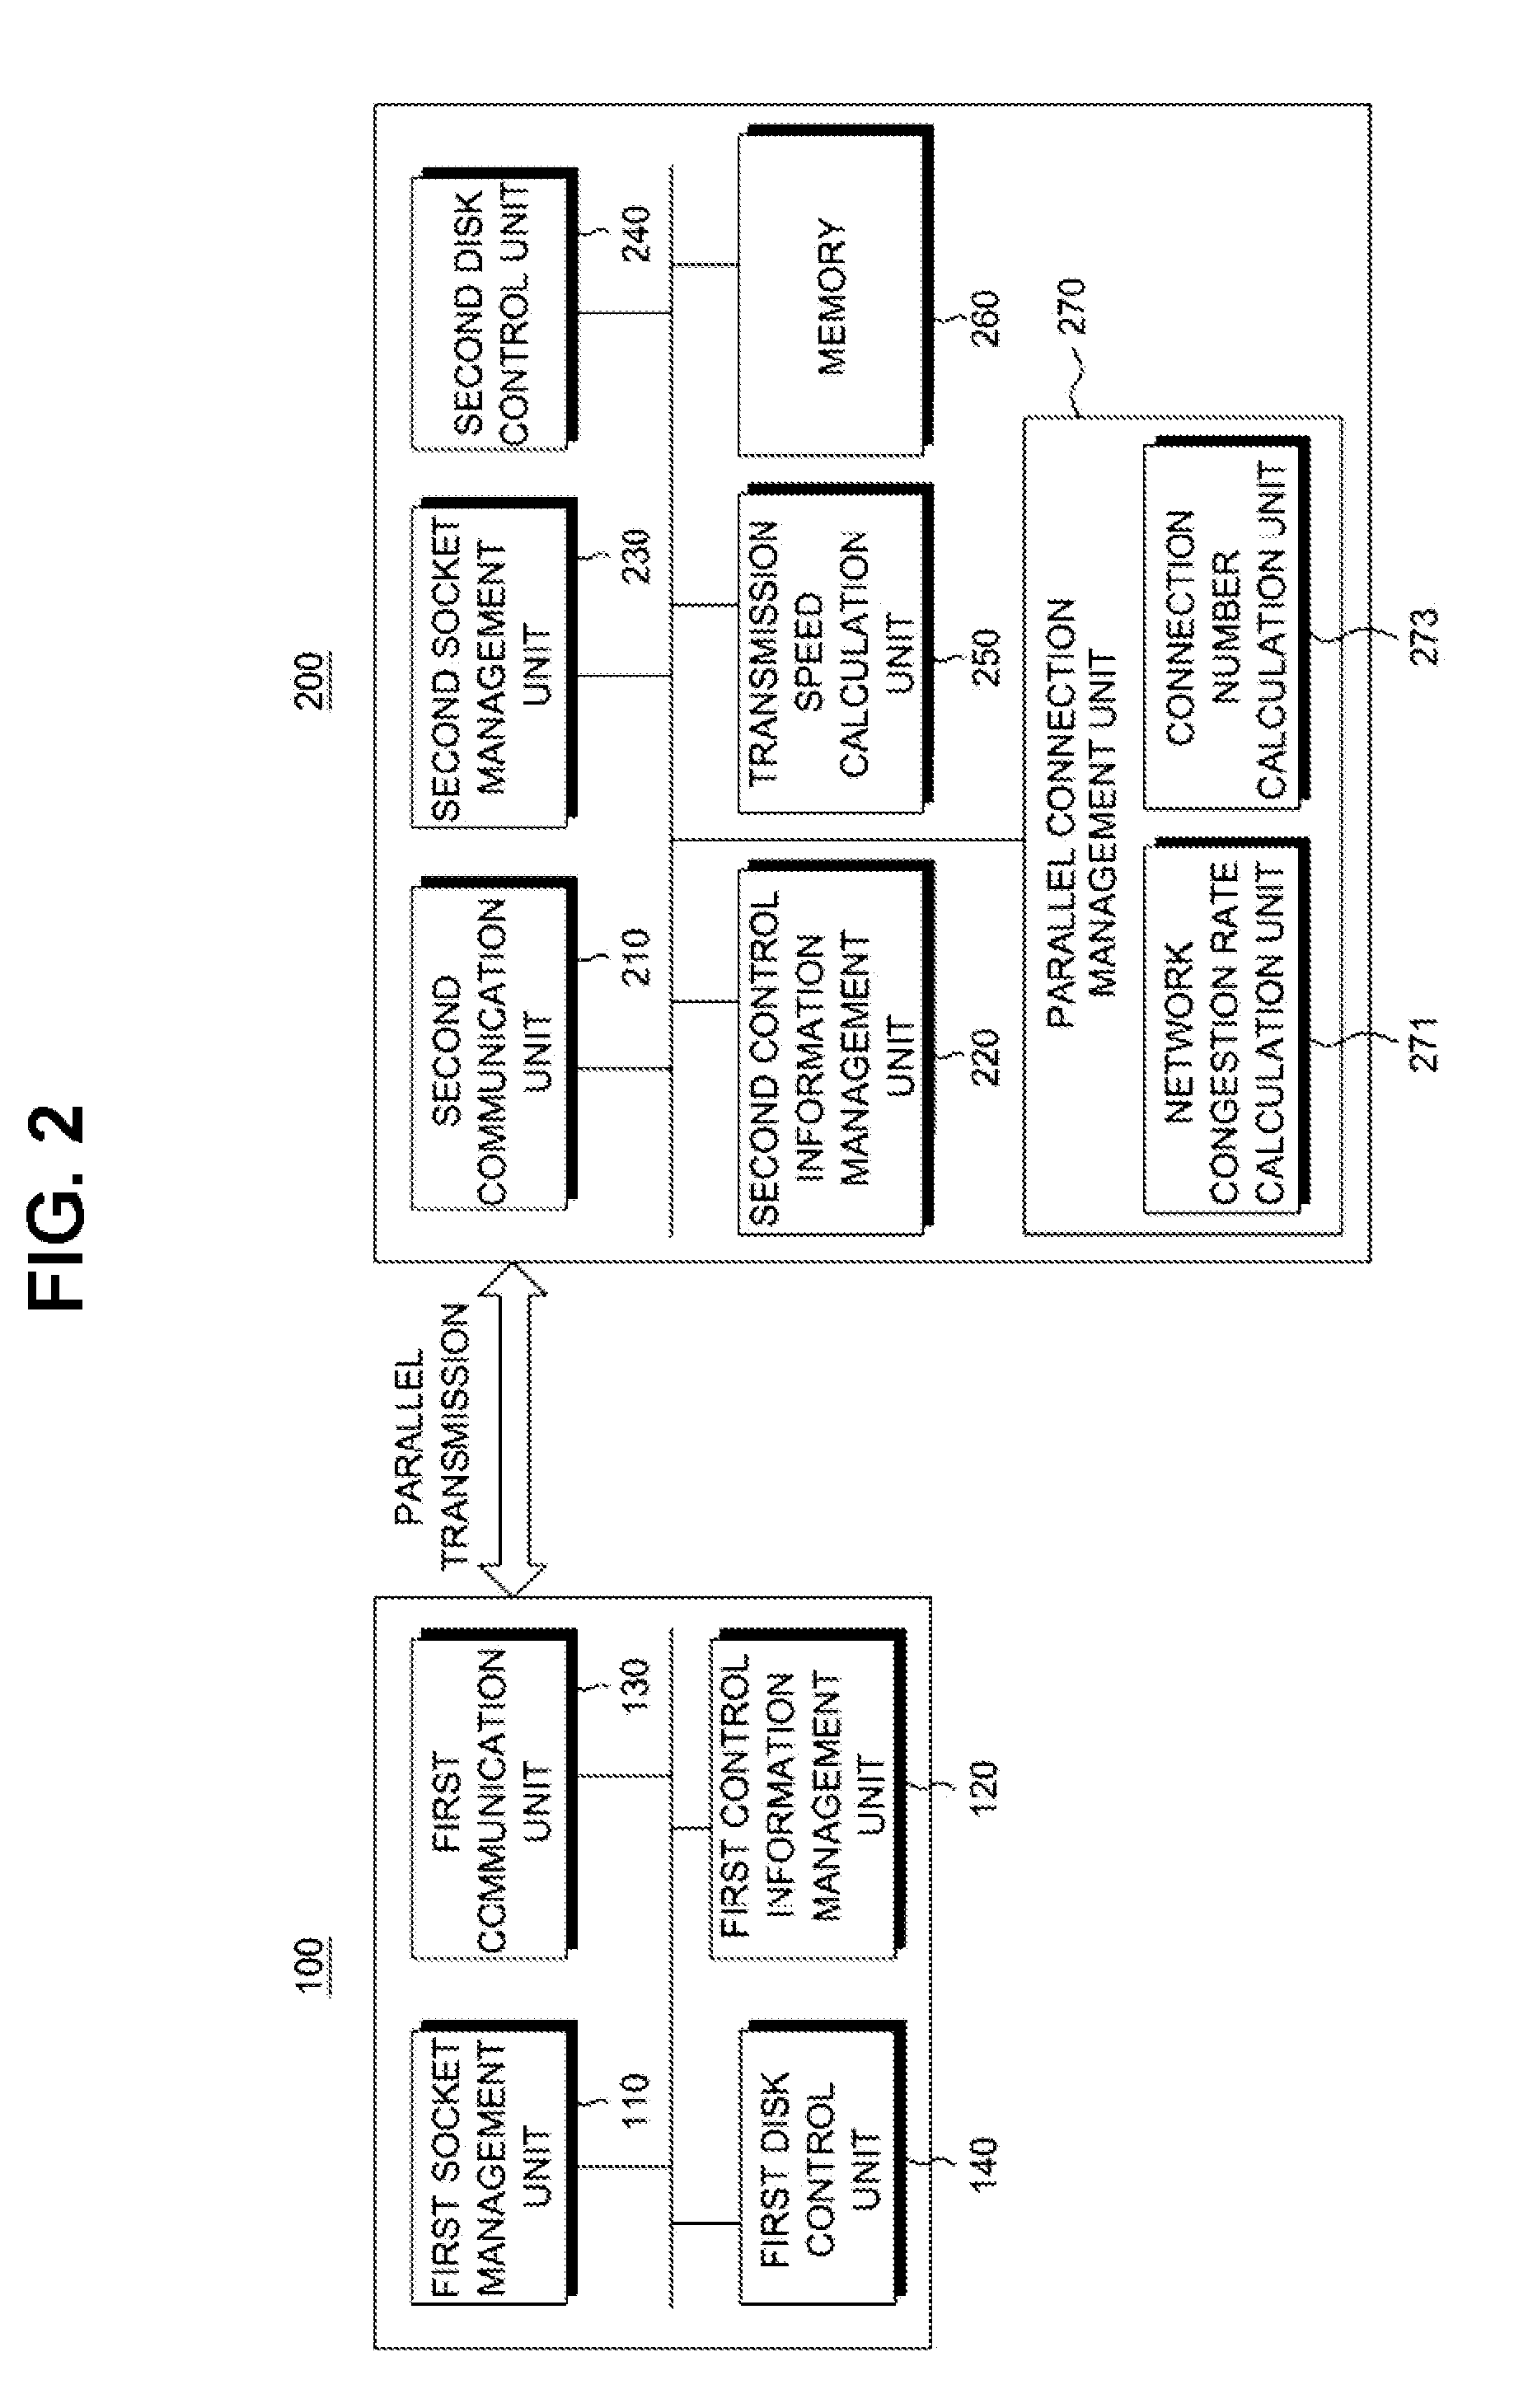 Method and apparatus for controlling stream to receive data in parallel